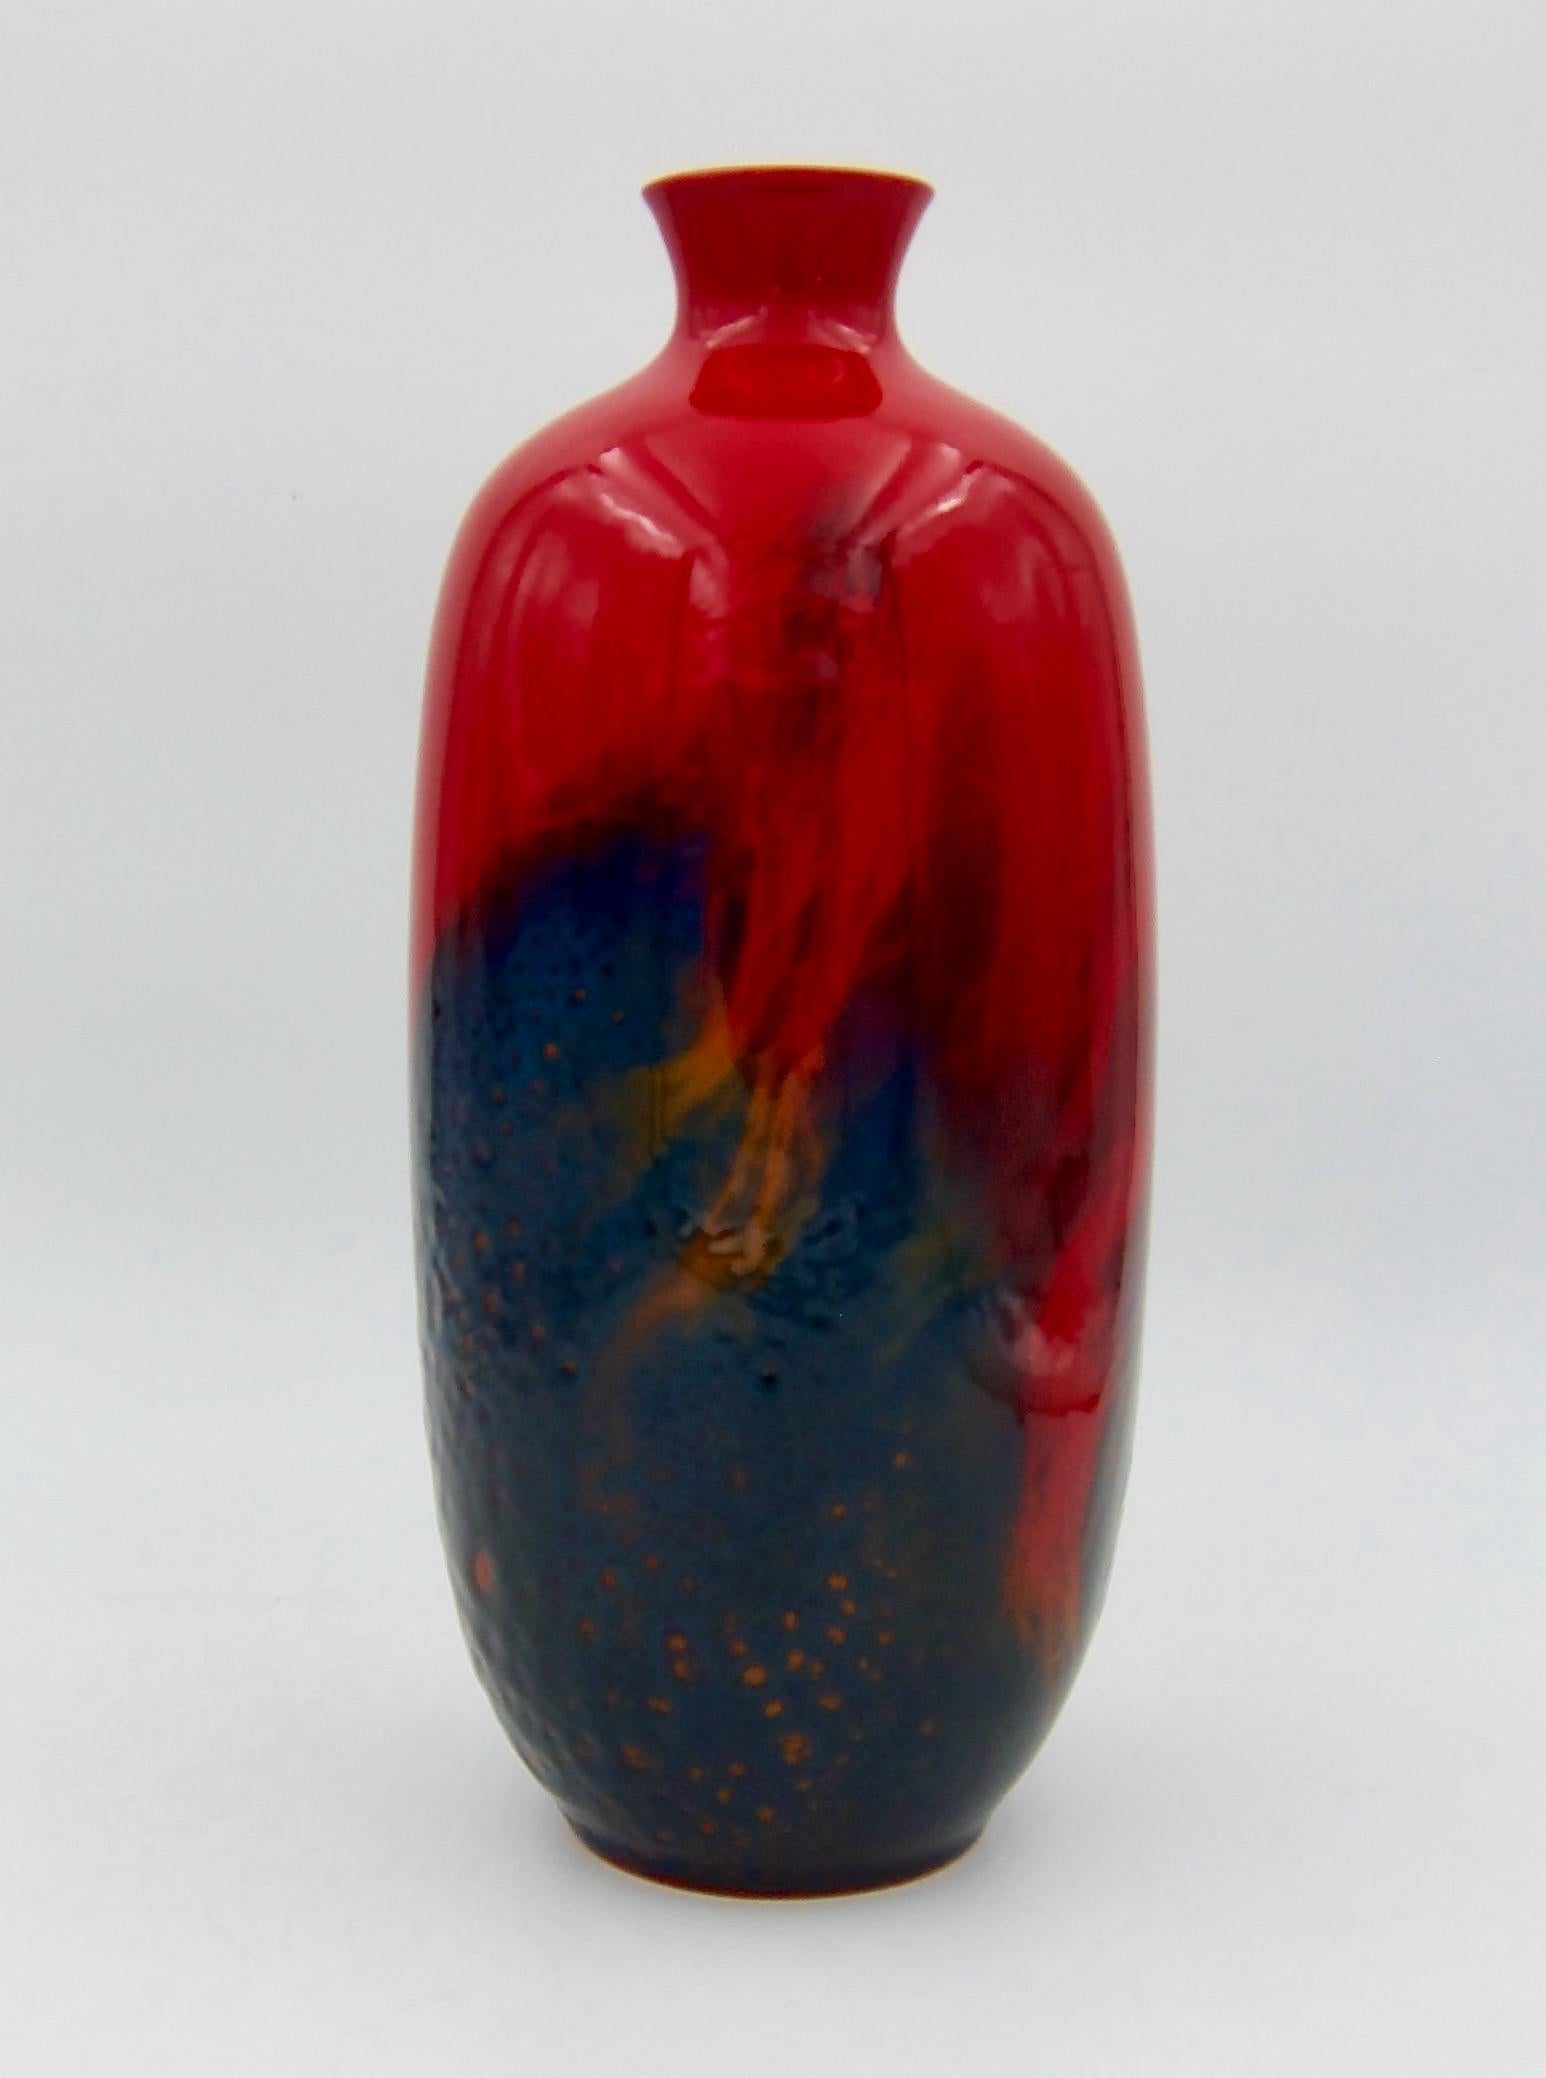 Ceramic Large Royal Doulton Red Flambe Vase from the Art Deco Period